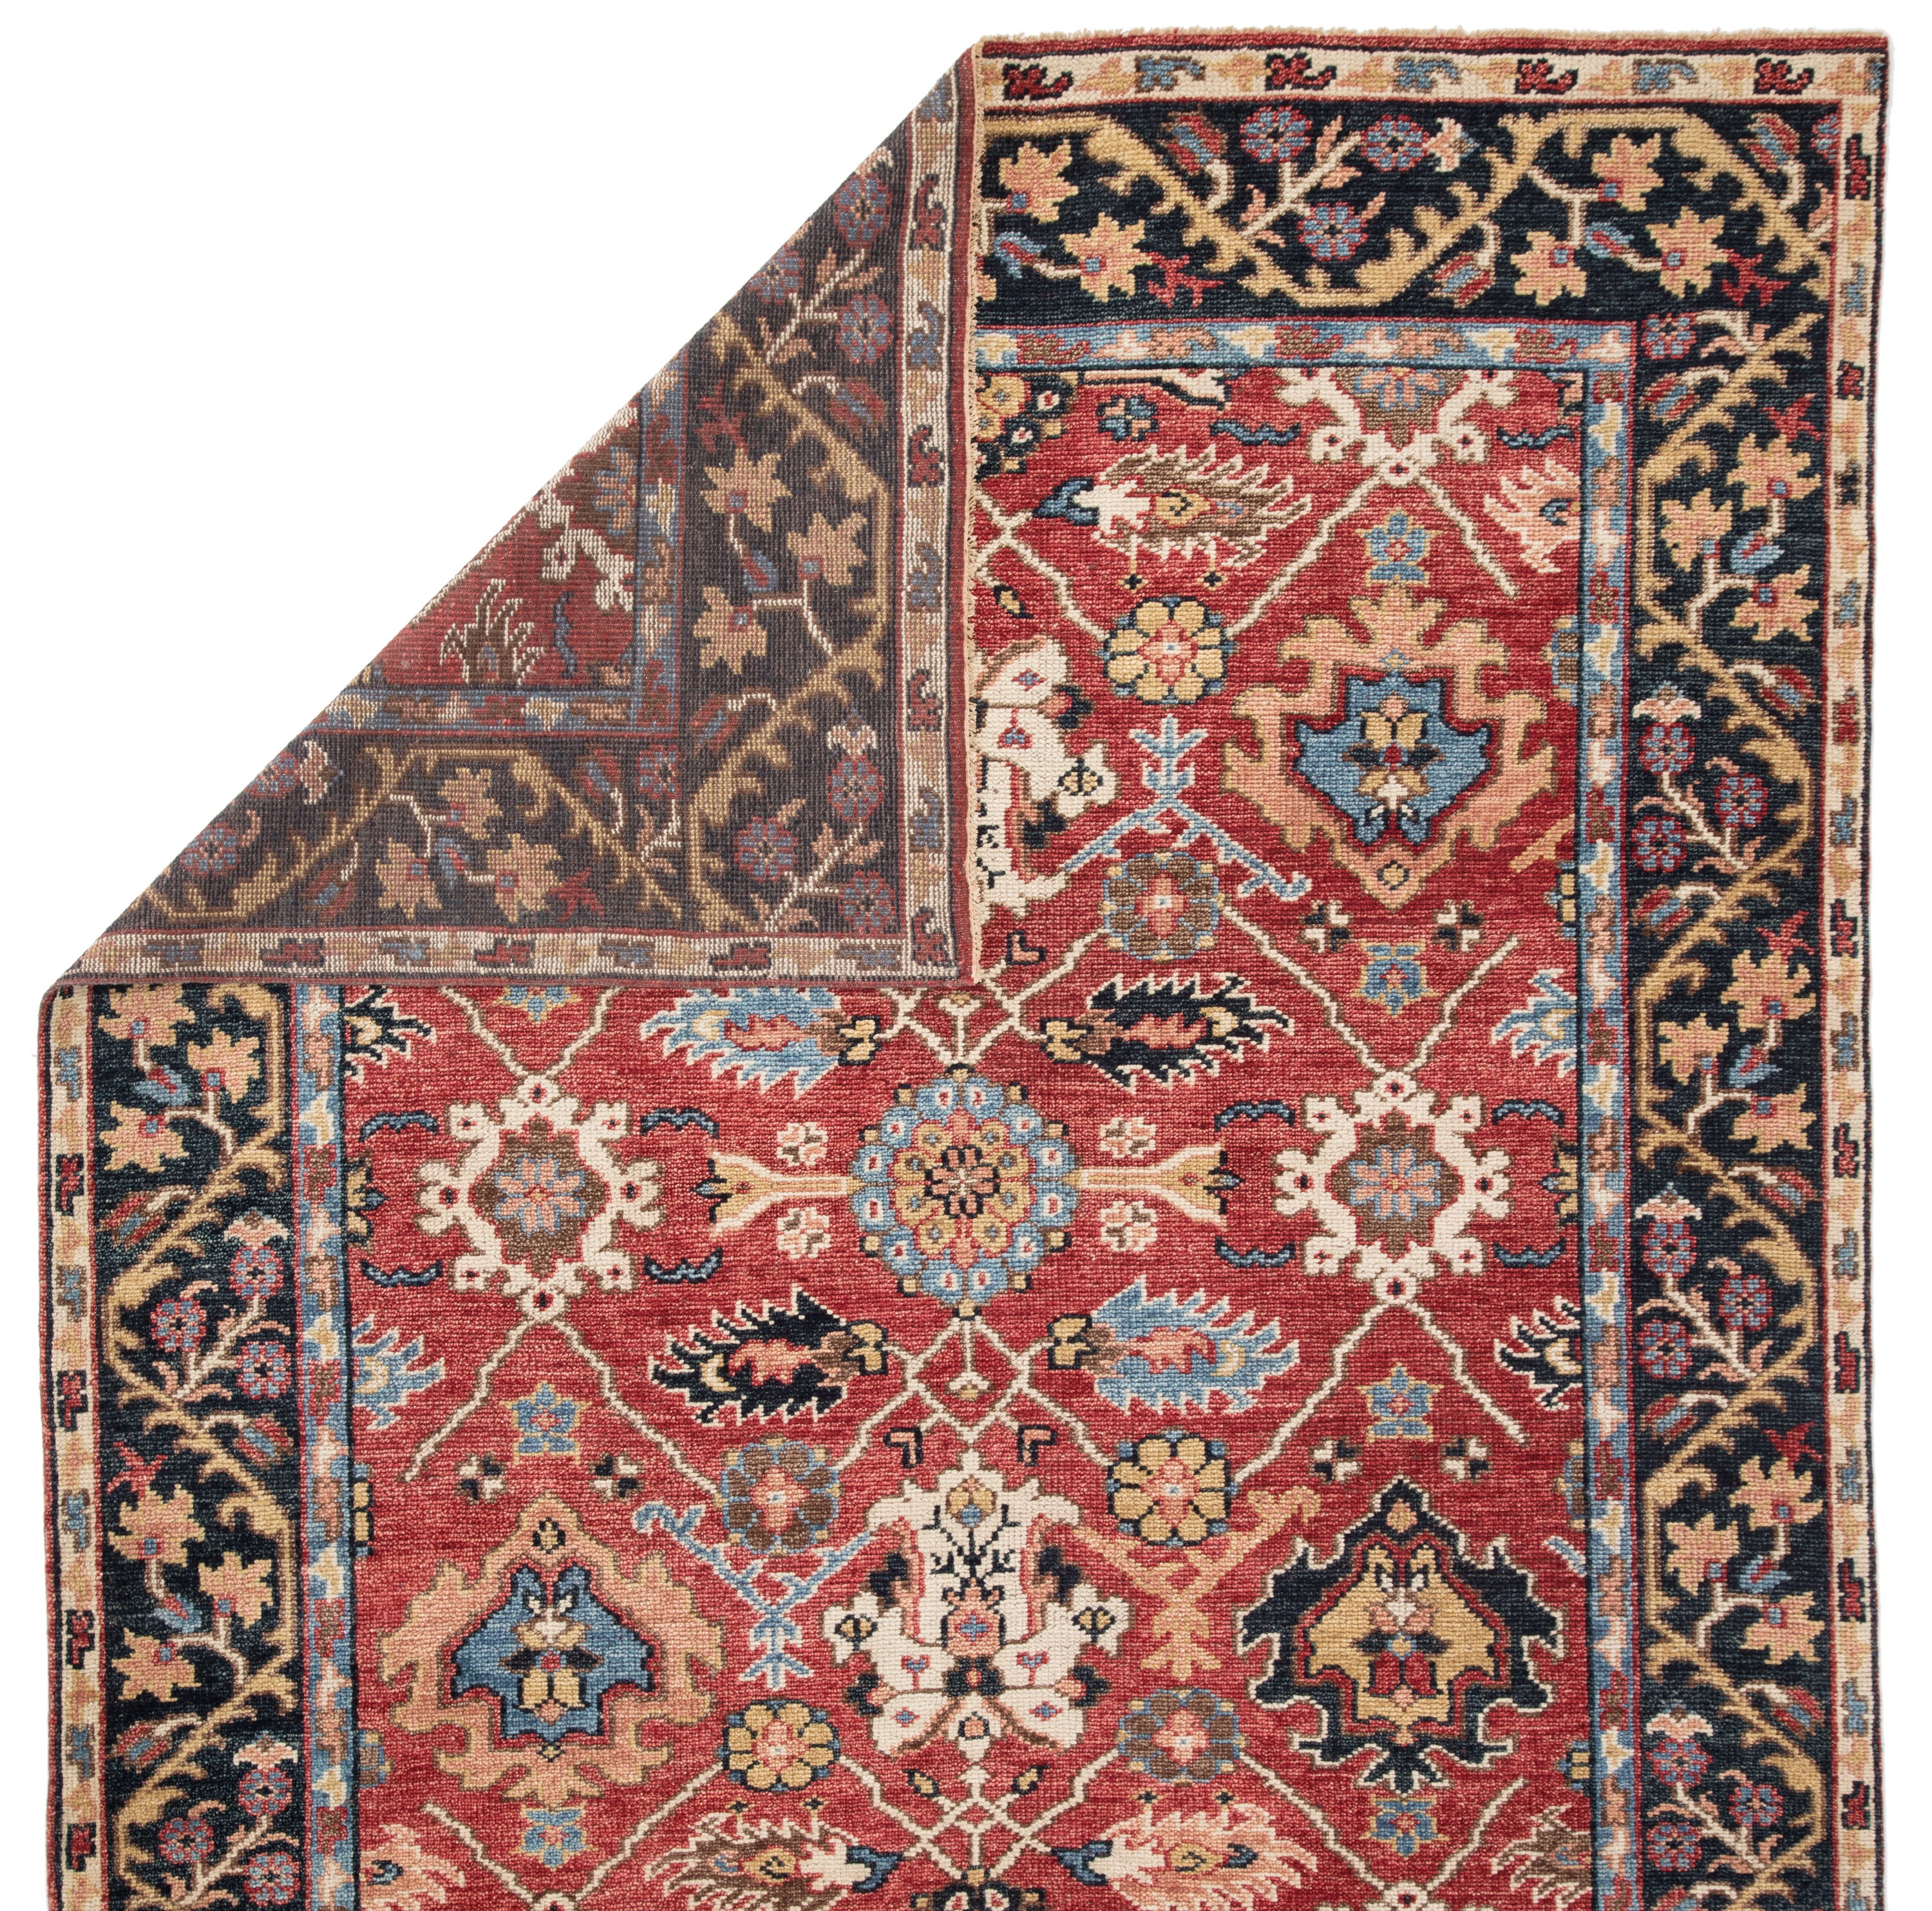 Aika Hand-Knotted Medallion Red/ Multicolor Area Rug (6'X9') - Image 2